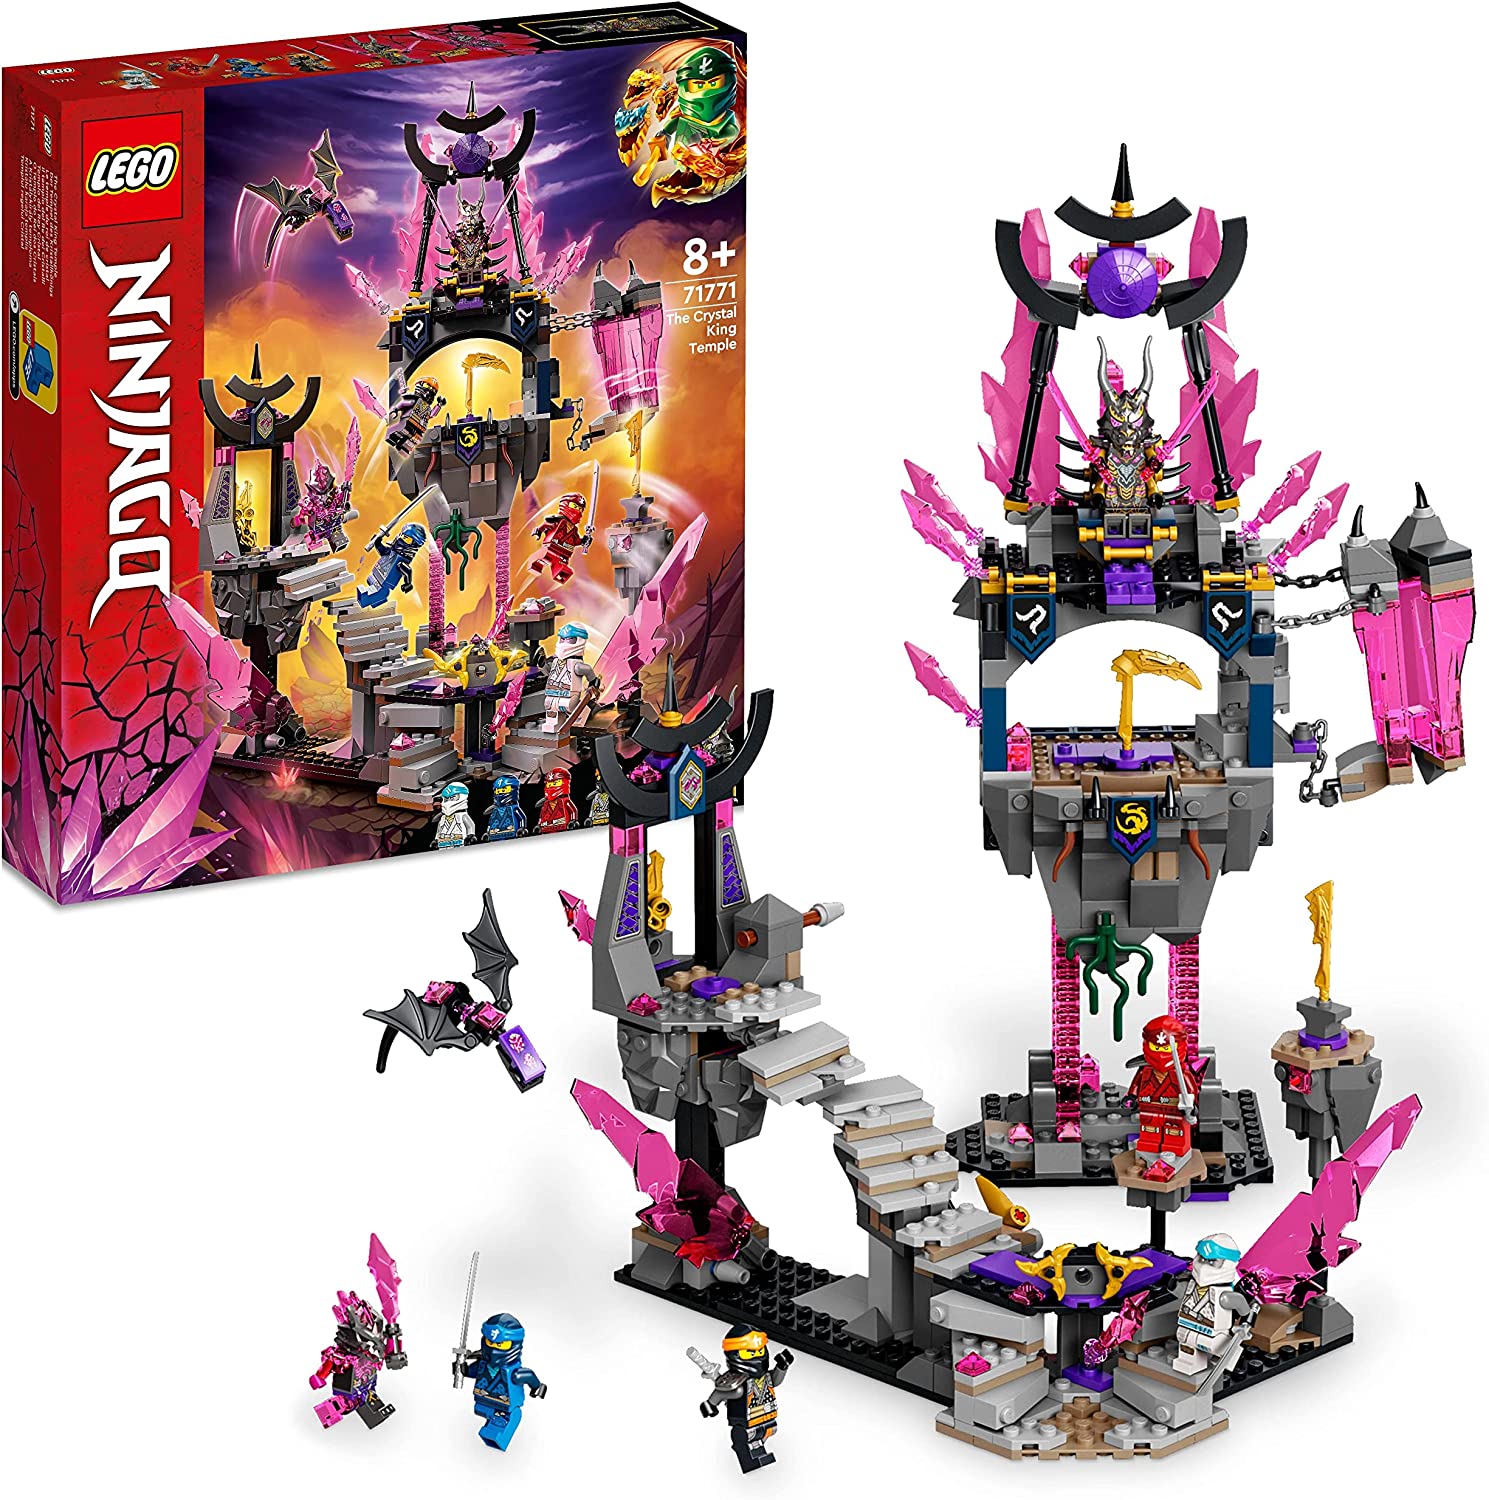 LEGO 71771 NINJAGO The Temple of the Crystal Royal Playset with Mini Figures Cole, Zane, Kai and Jay, Action Toy for Children from 8 Years